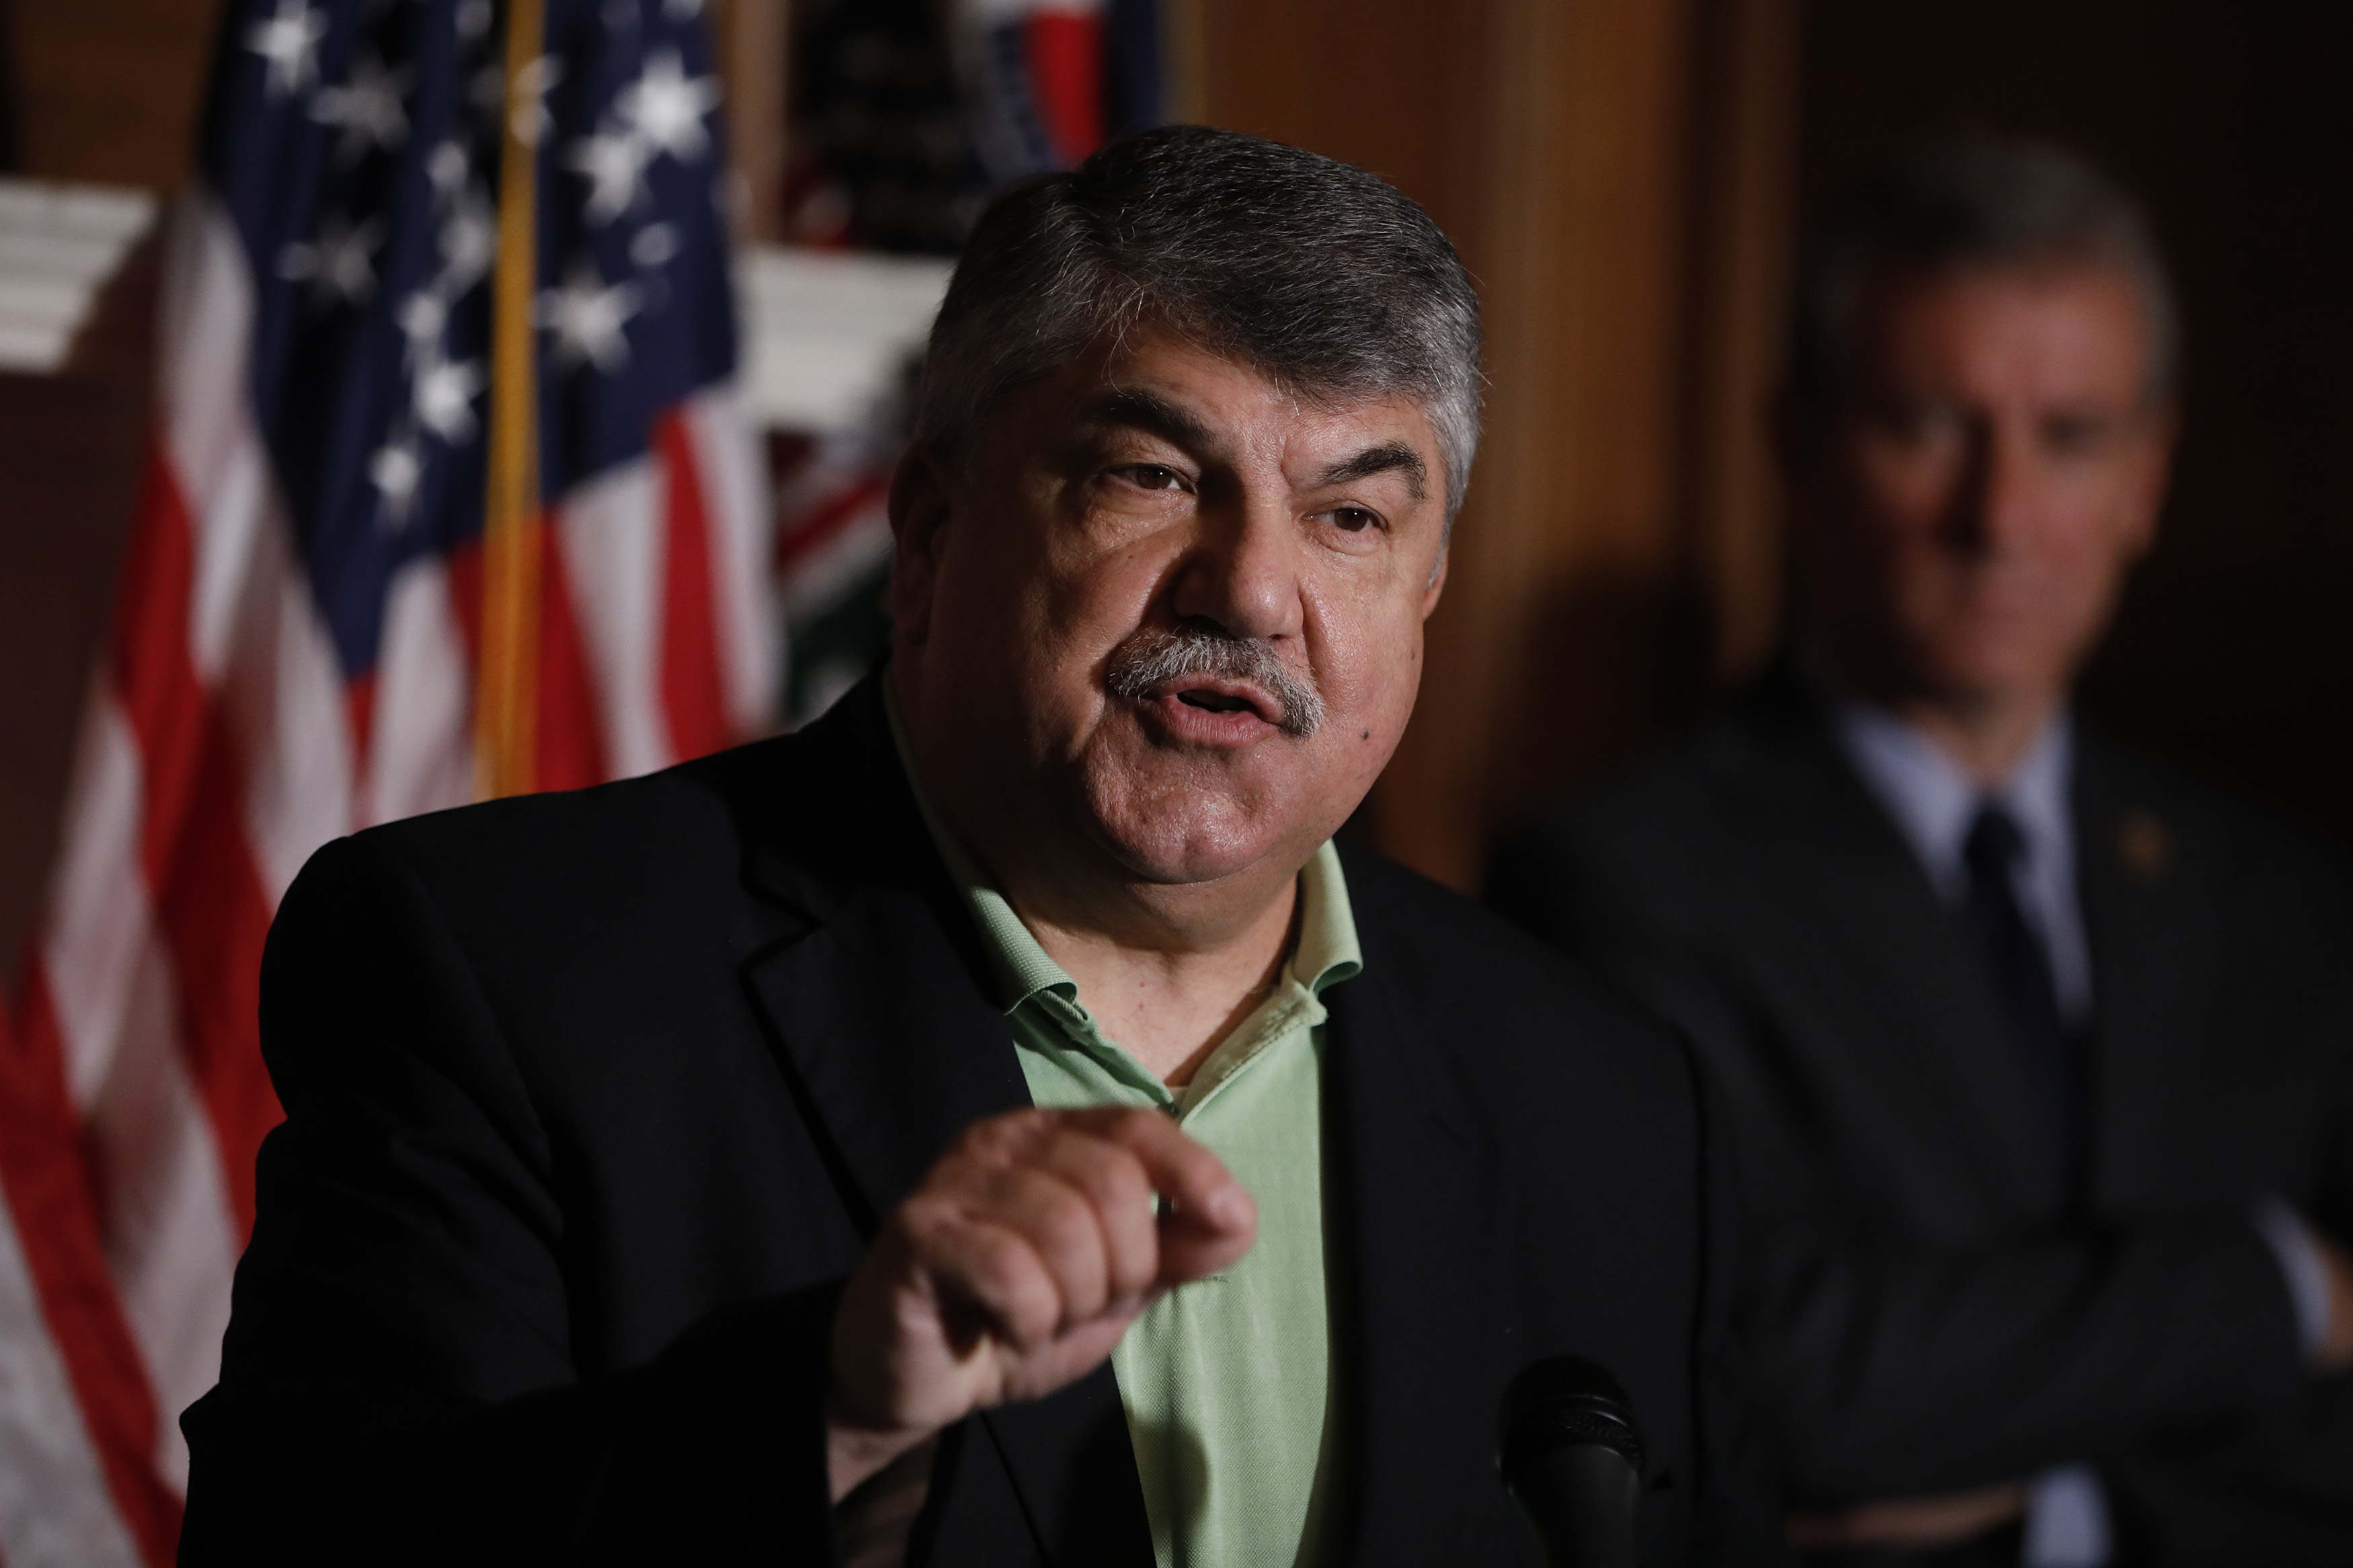 AFL-CIO President Richard Trumka speaks in support of legislation to protect the rights of public sector works following the Supreme Court's decision in Janus v. AFSCME. (Aaron P. Bernstein/Getty Images)